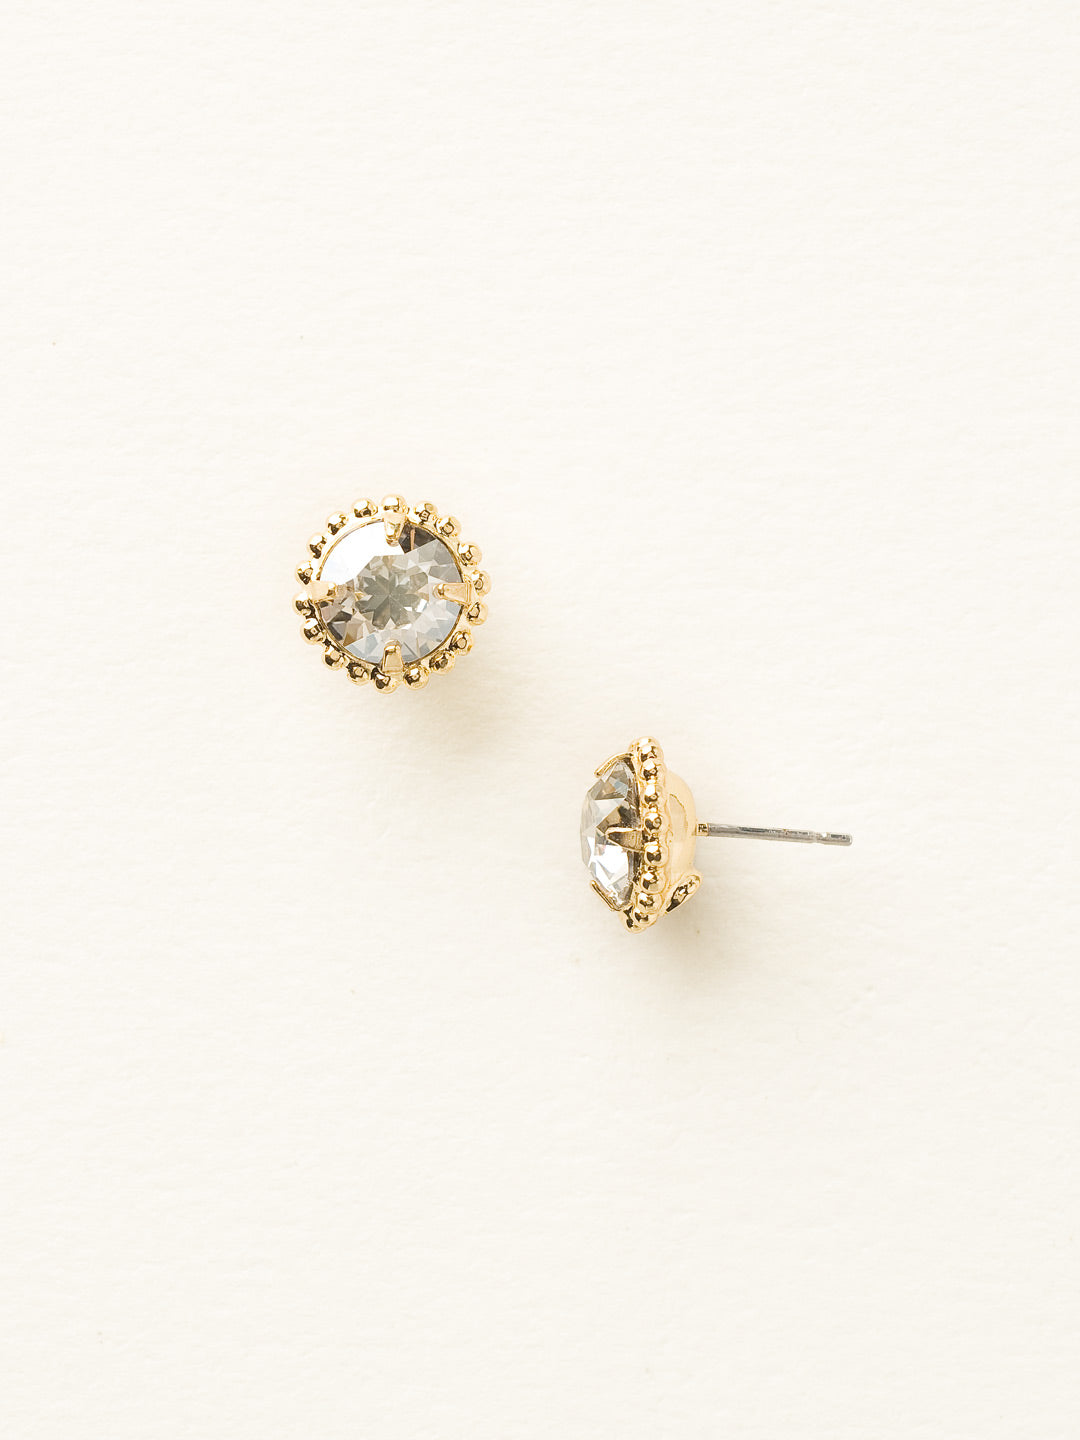 Simplicity Stud Earrings - EBY38BGSSH - <p>A timeless classic, the Simplicity Stud Earrings feature round cut crystals in a variety of colors; accented with a halo of metal beaded detail. Need help picking a stud? <a href="https://www.sorrelli.com/blogs/sisterhood/round-stud-earrings-101-a-rundown-of-sizes-styles-and-sparkle">Check out our size guide!</a> From Sorrelli's Silver Shade collection in our Bright Gold-tone finish.</p>